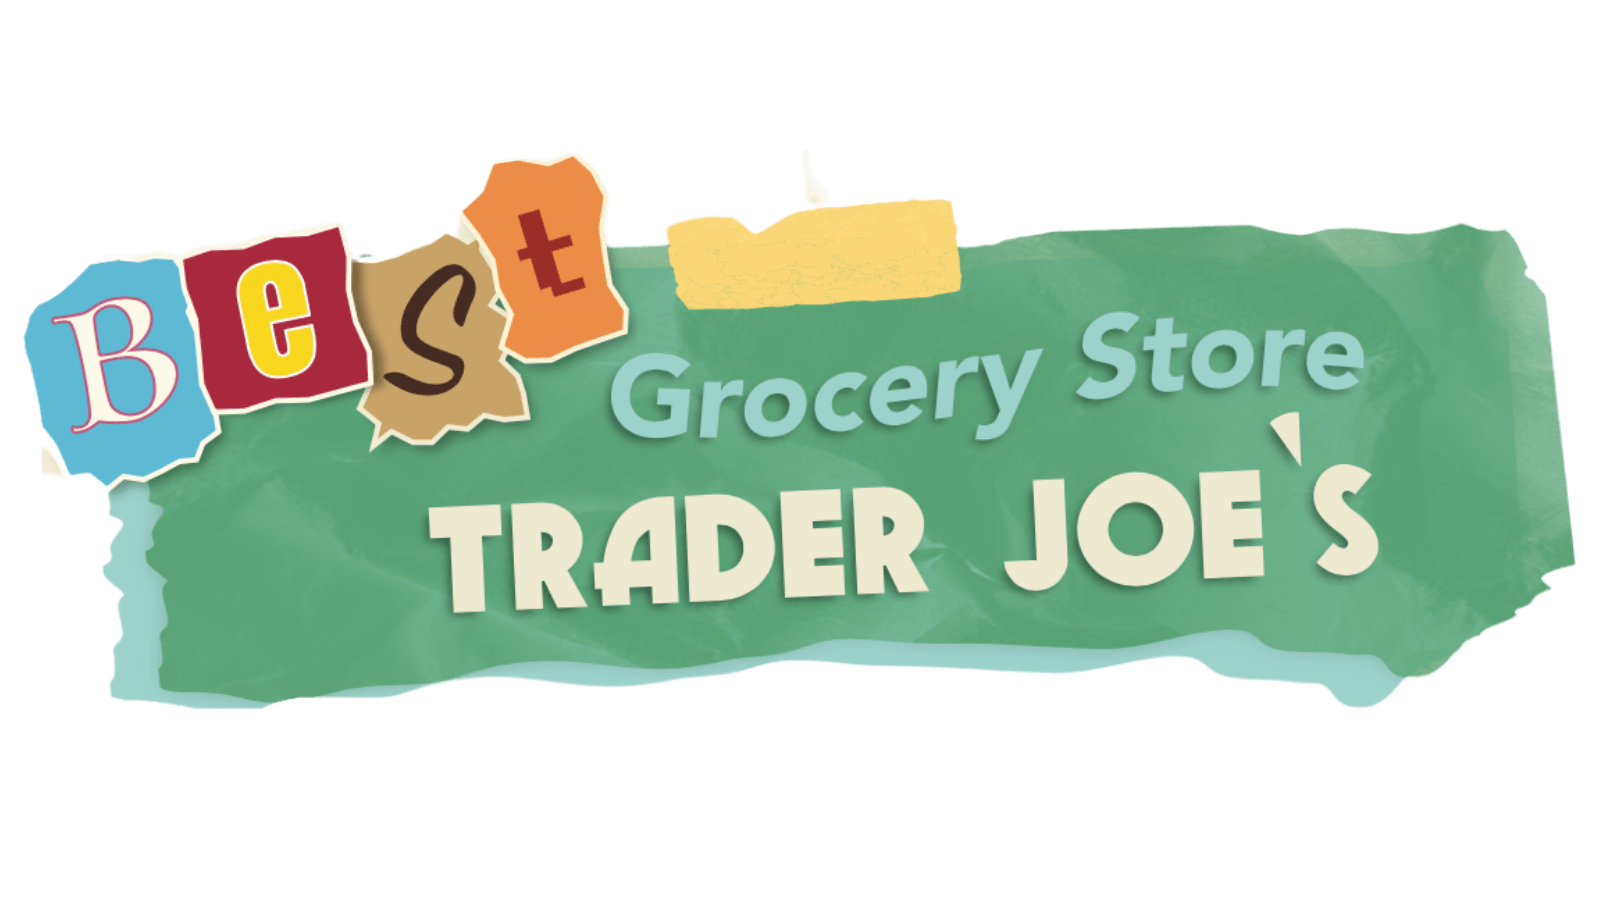 Photo for Best Grocery Store: Trader Joe's